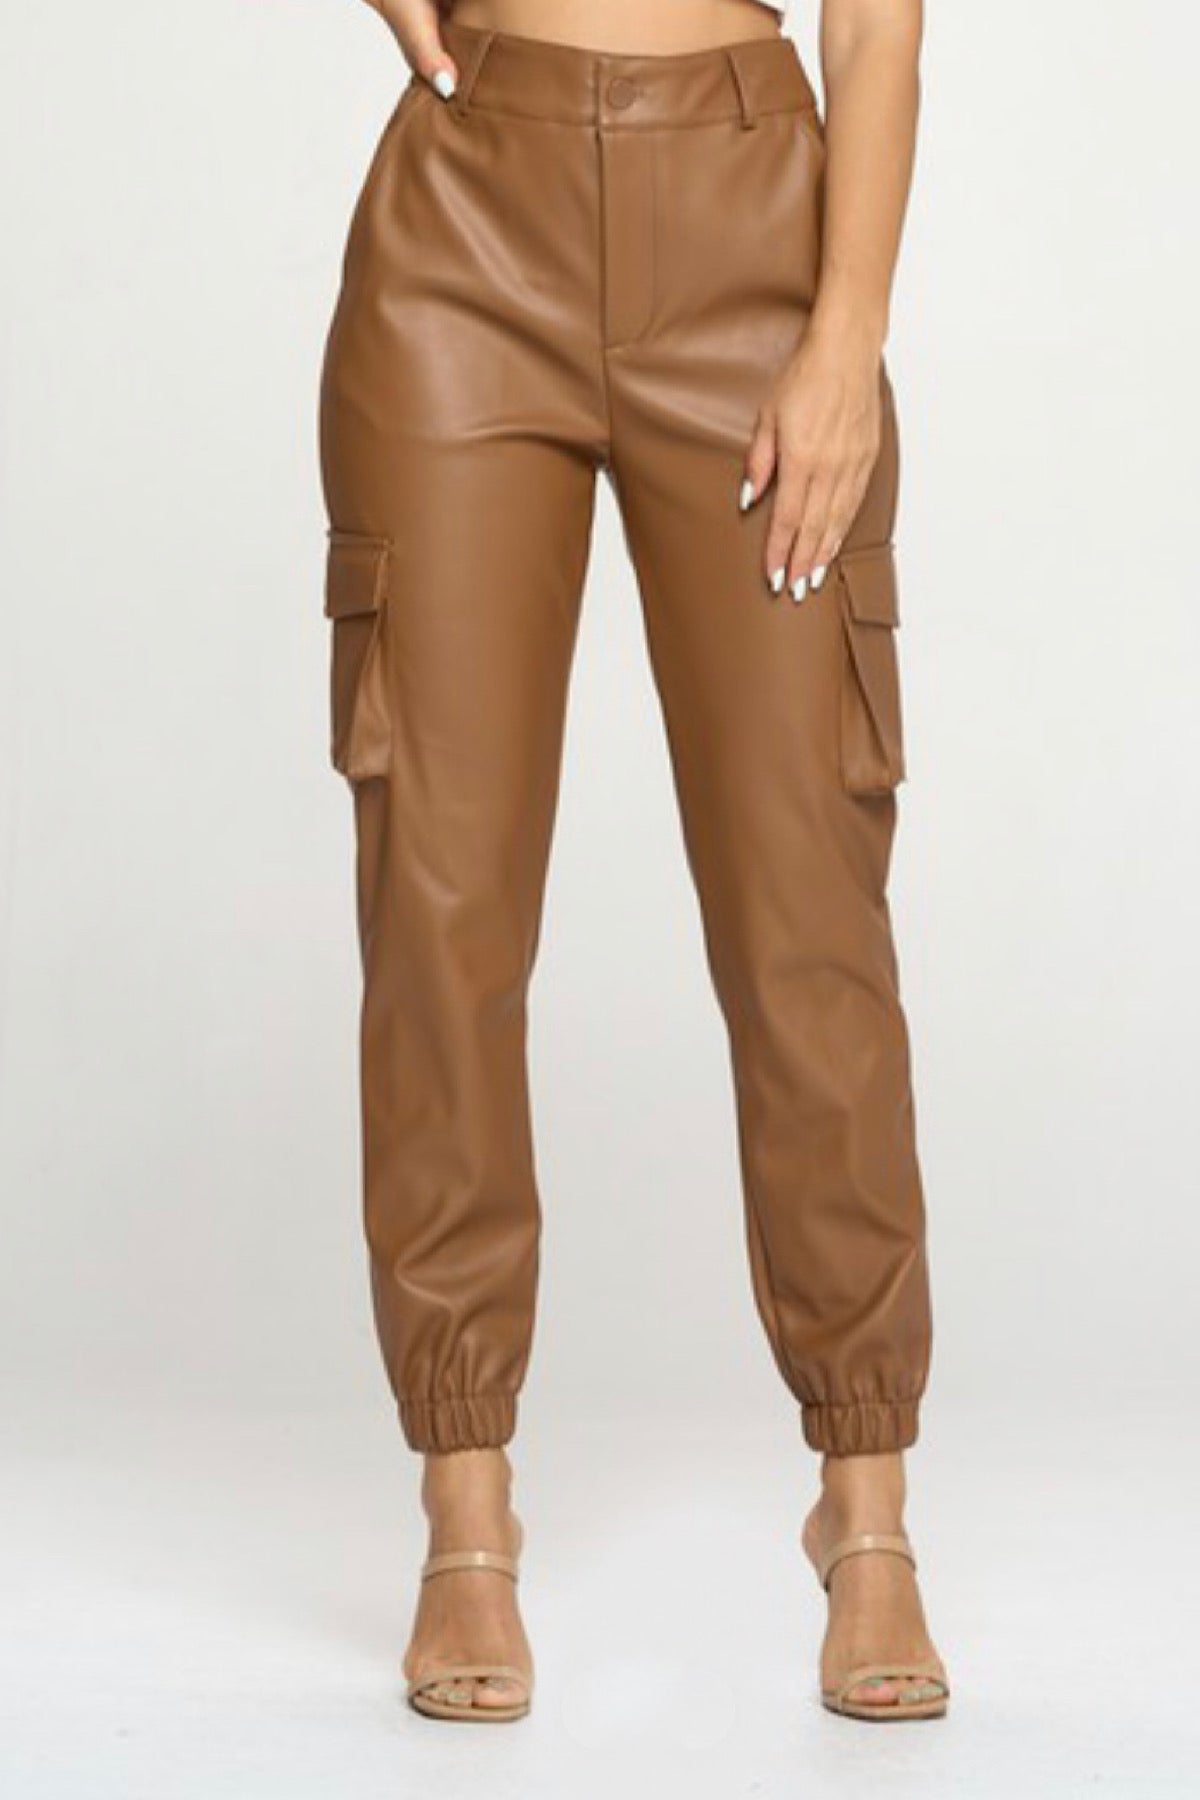 Work it Faux leather cargo pants